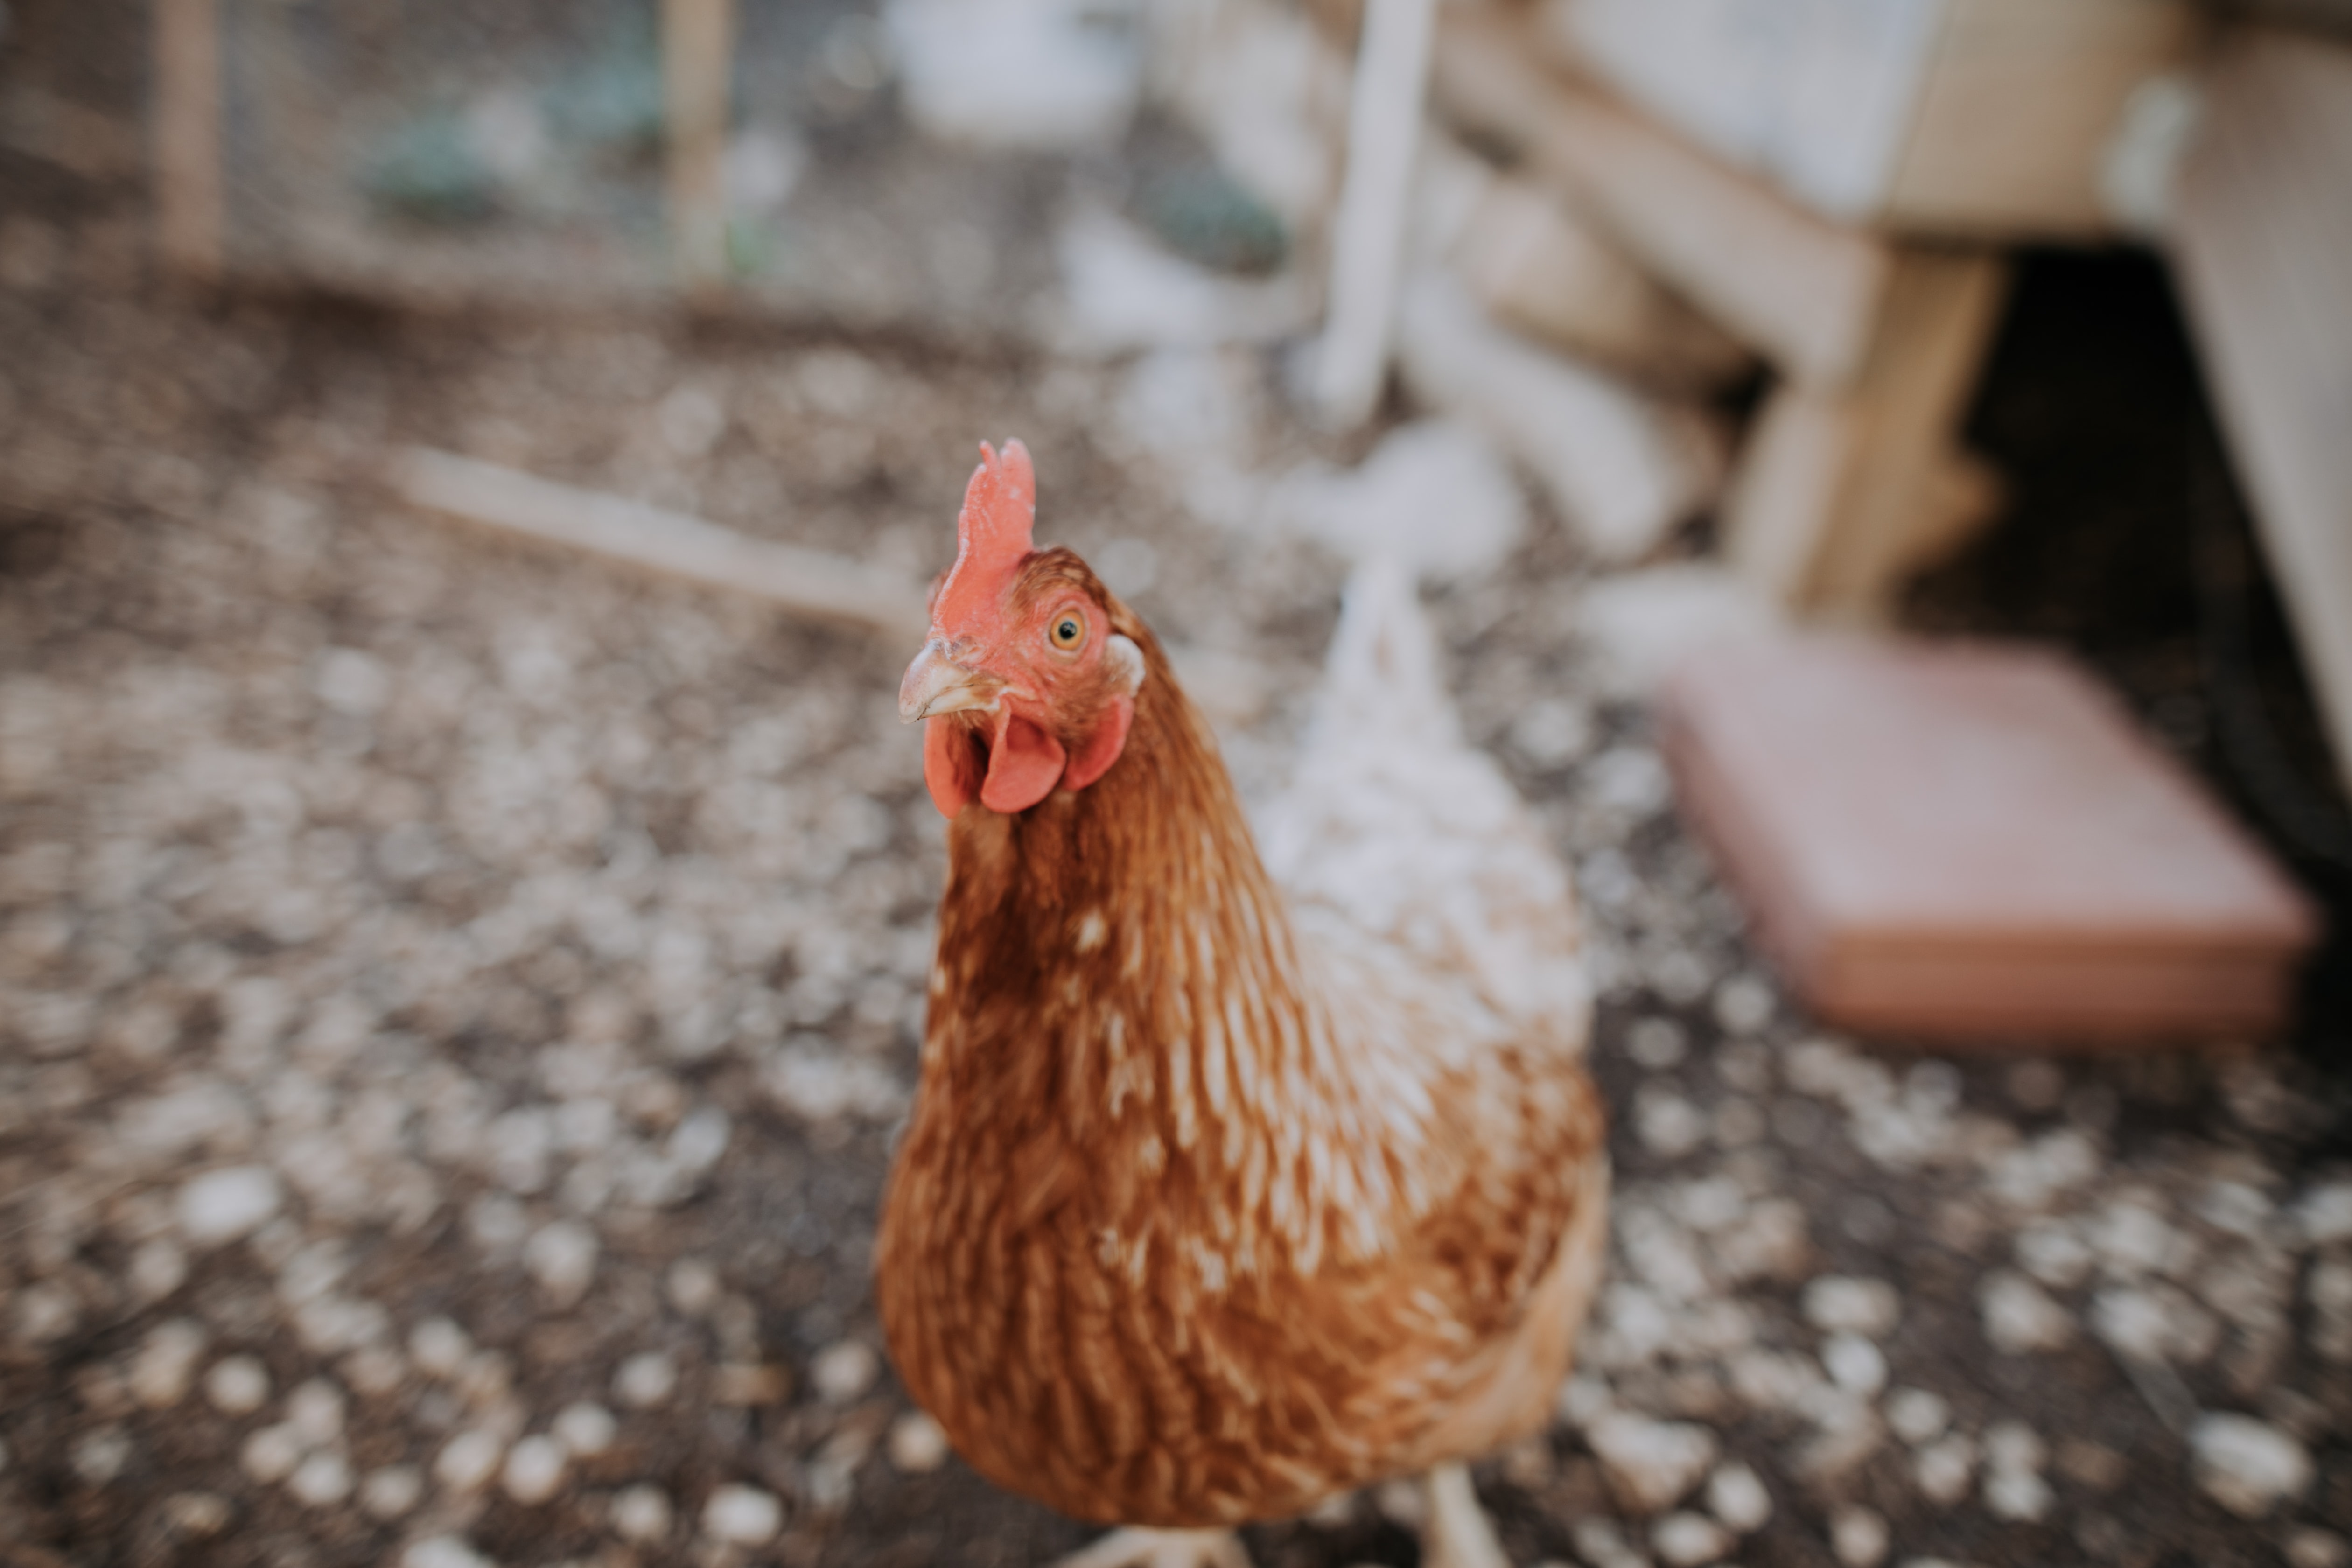 Animal Place Rescues Thousands of Unwanted Chickens